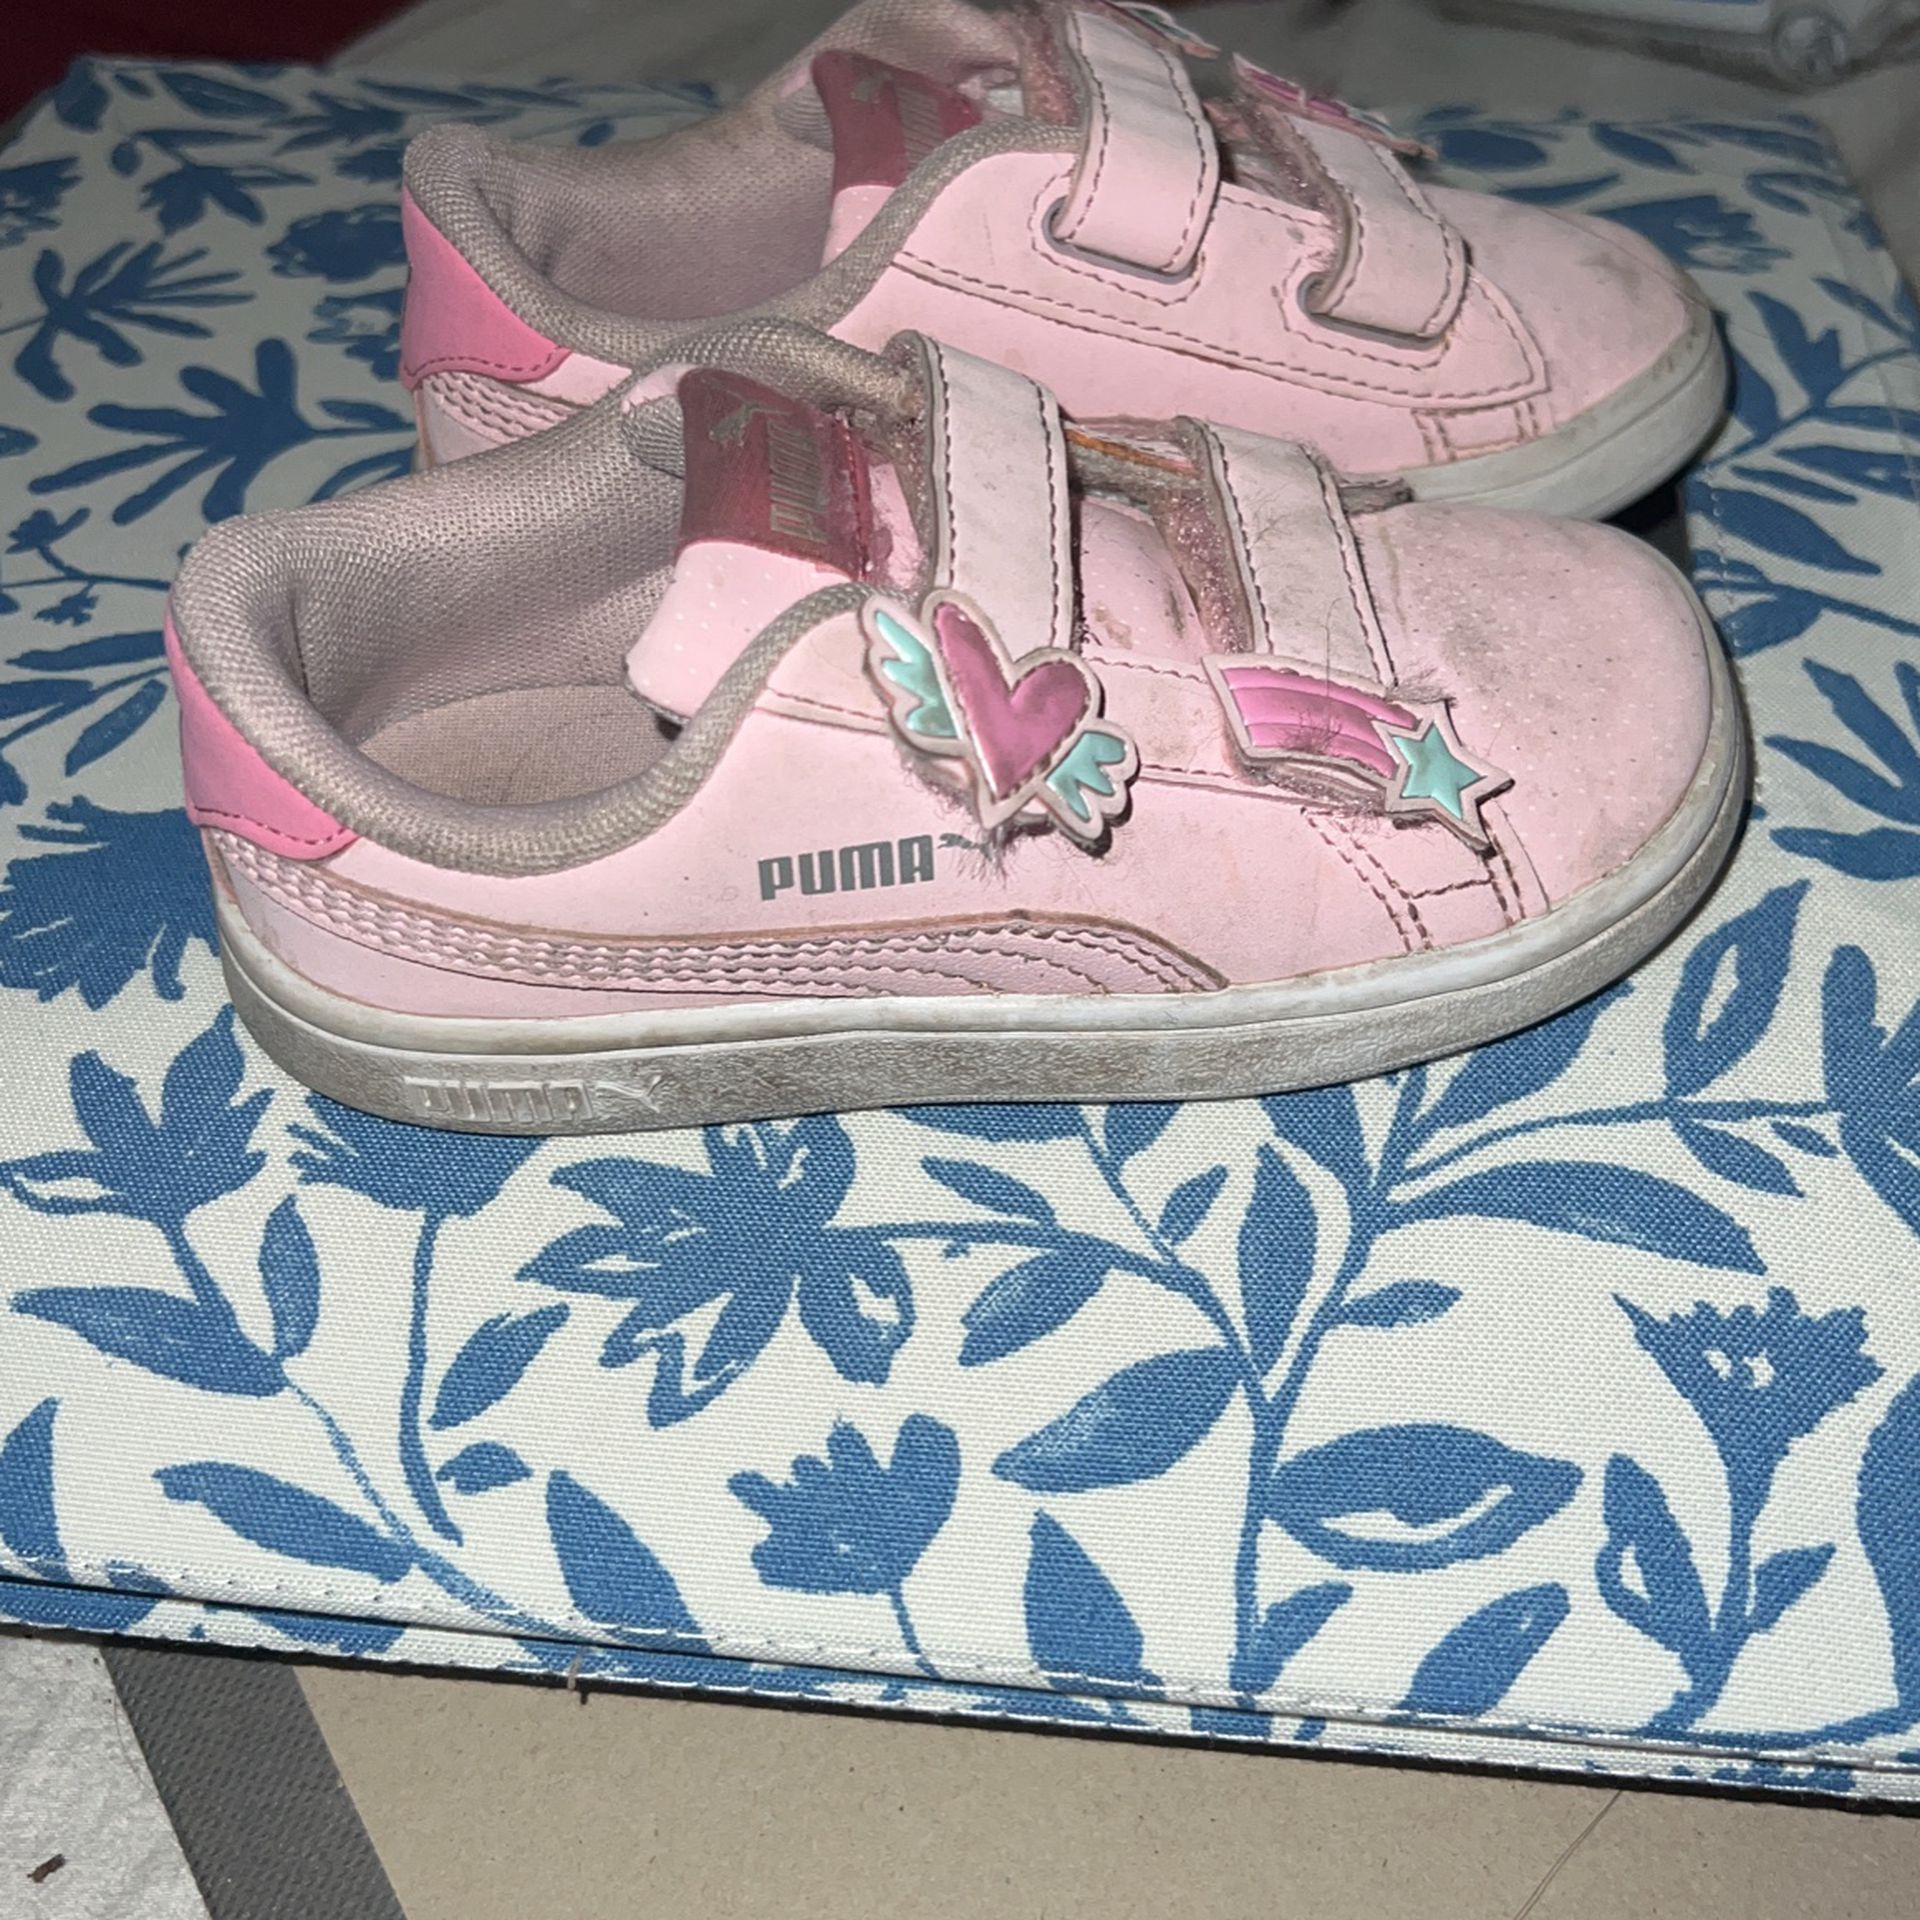 Puma Toddlers Size 8 